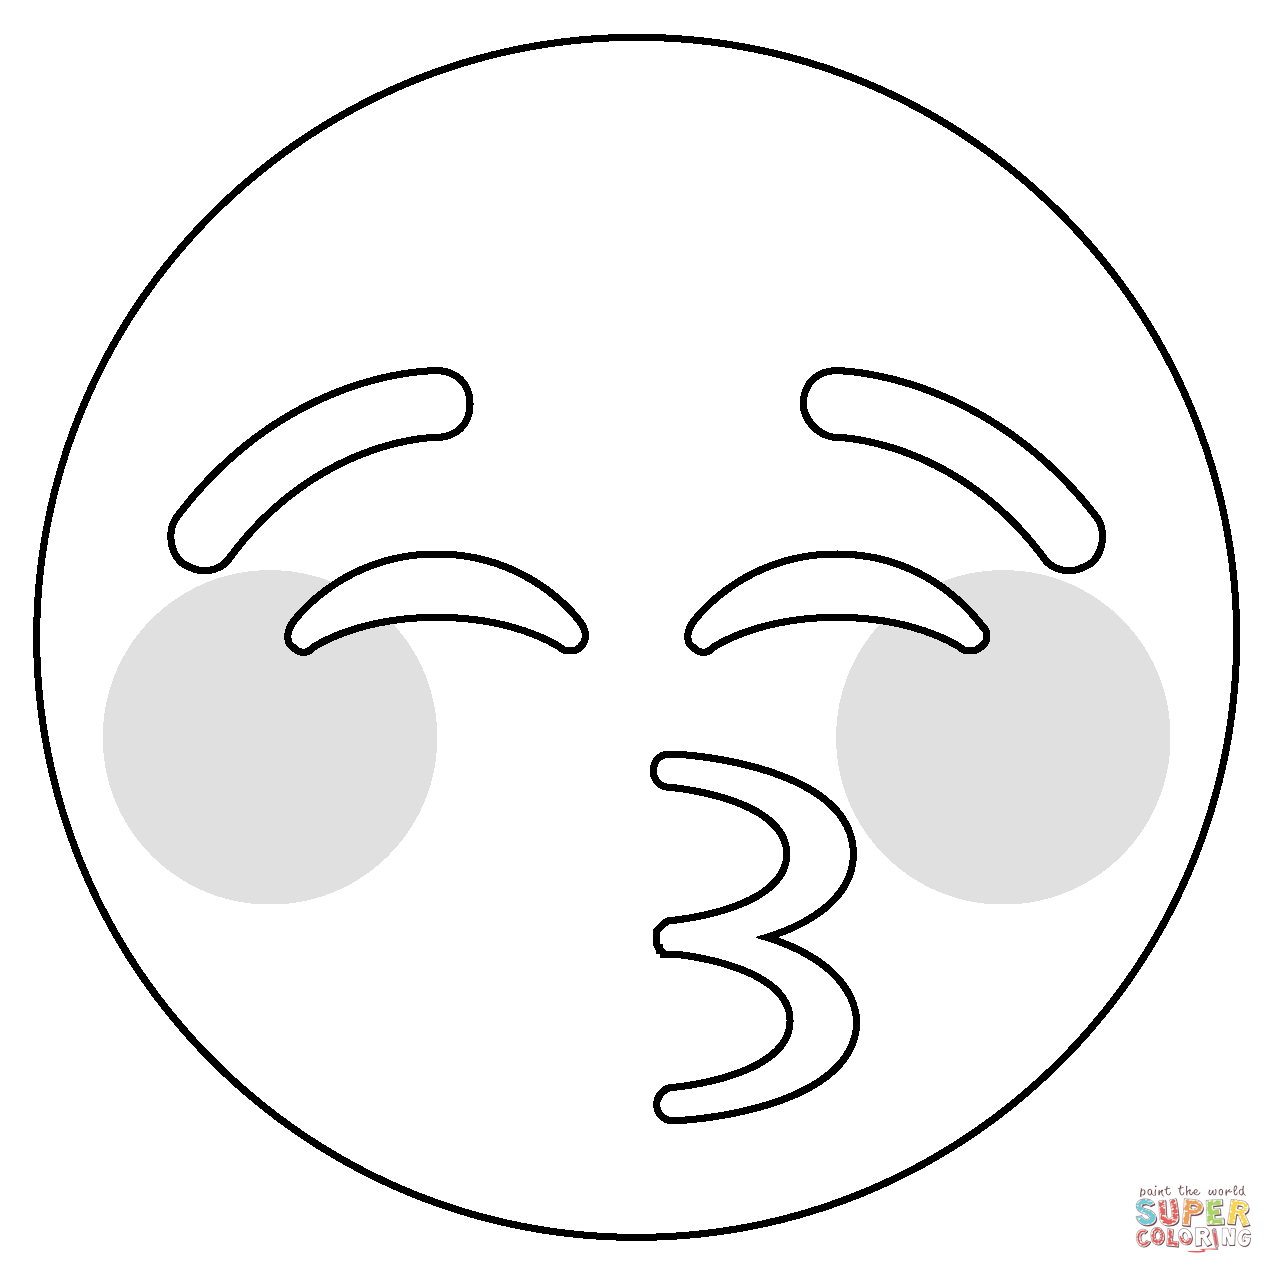 Kissing face with closed eyes emoji coloring page free printable coloring pages